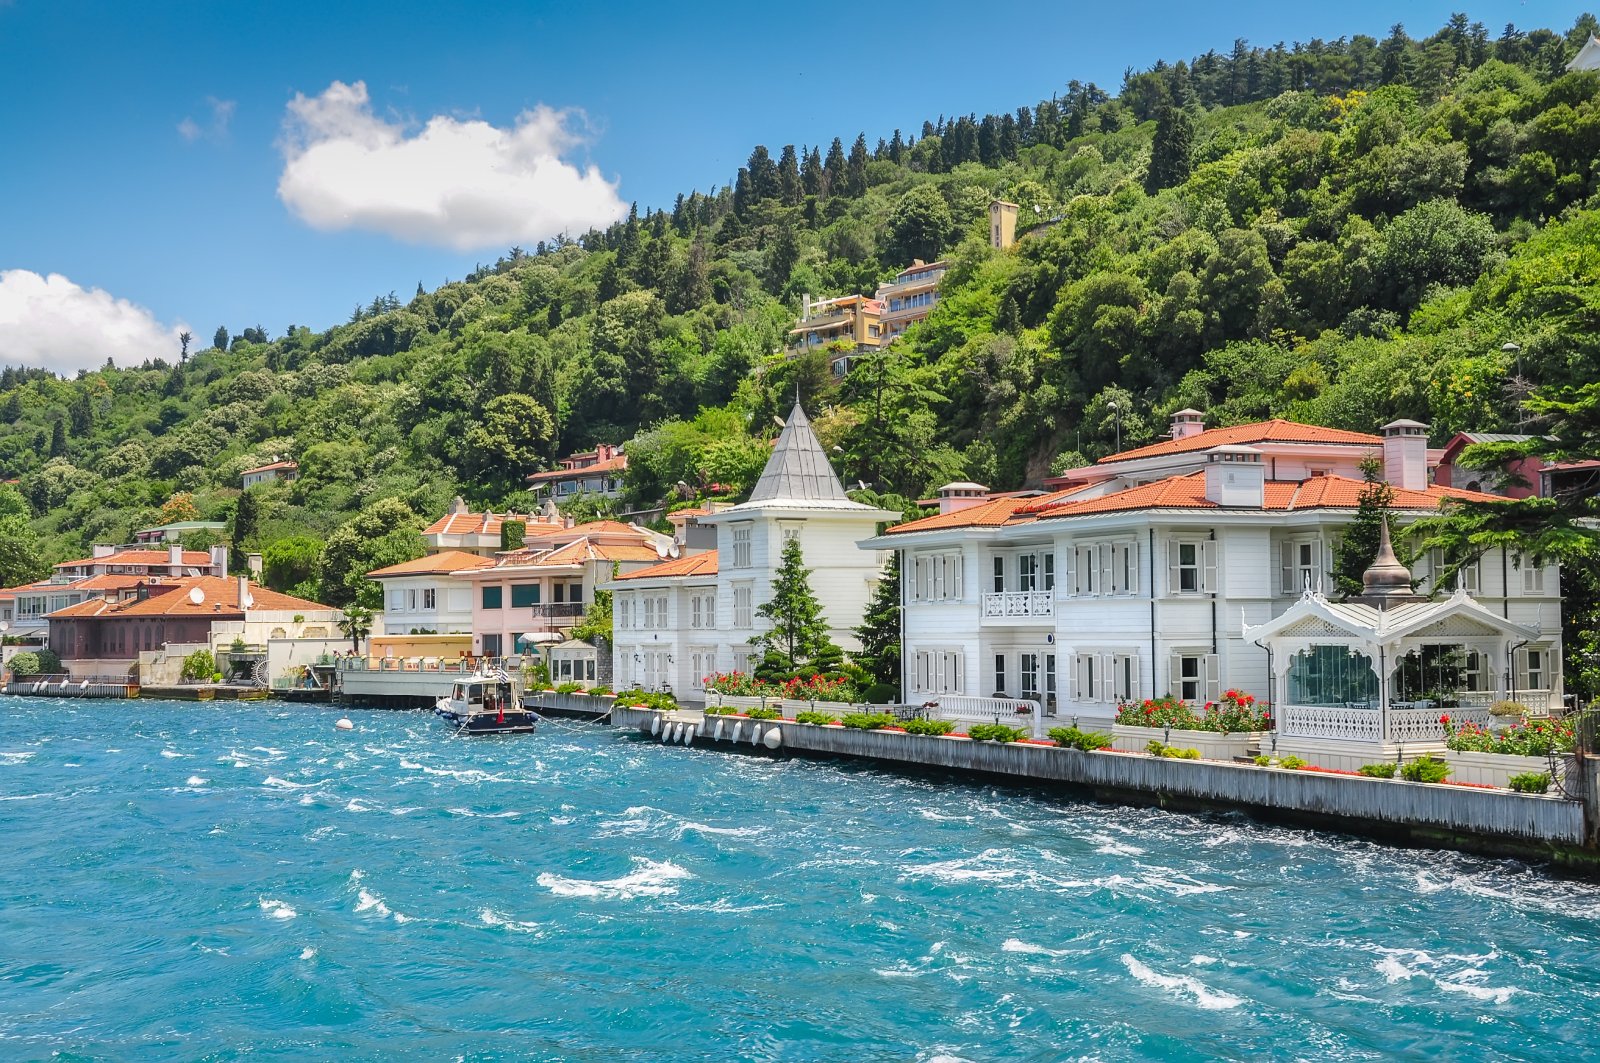 <p class="wp-caption-text">Image Credit: Shutterstock / Ann Stryzhekin</p>  <p><span>The Princes’ Islands, a group of nine islands off Istanbul’s Asian shore, offer a peaceful retreat from the city’s hustle and bustle. Büyükada, the largest island, is known for its Ottoman-era mansions, pine forests, and vehicle-free streets, making it ideal for bicycle rides and horse-drawn carriage tours. The islands glimpse into Istanbul’s multicultural past, with historic churches, synagogues, and mosques dotting their landscapes. A visit to the Princes’ Islands is a journey into a slower-paced lifestyle, where the beauty of the Marmara Sea and the charm of island life take center stage.</span></p>